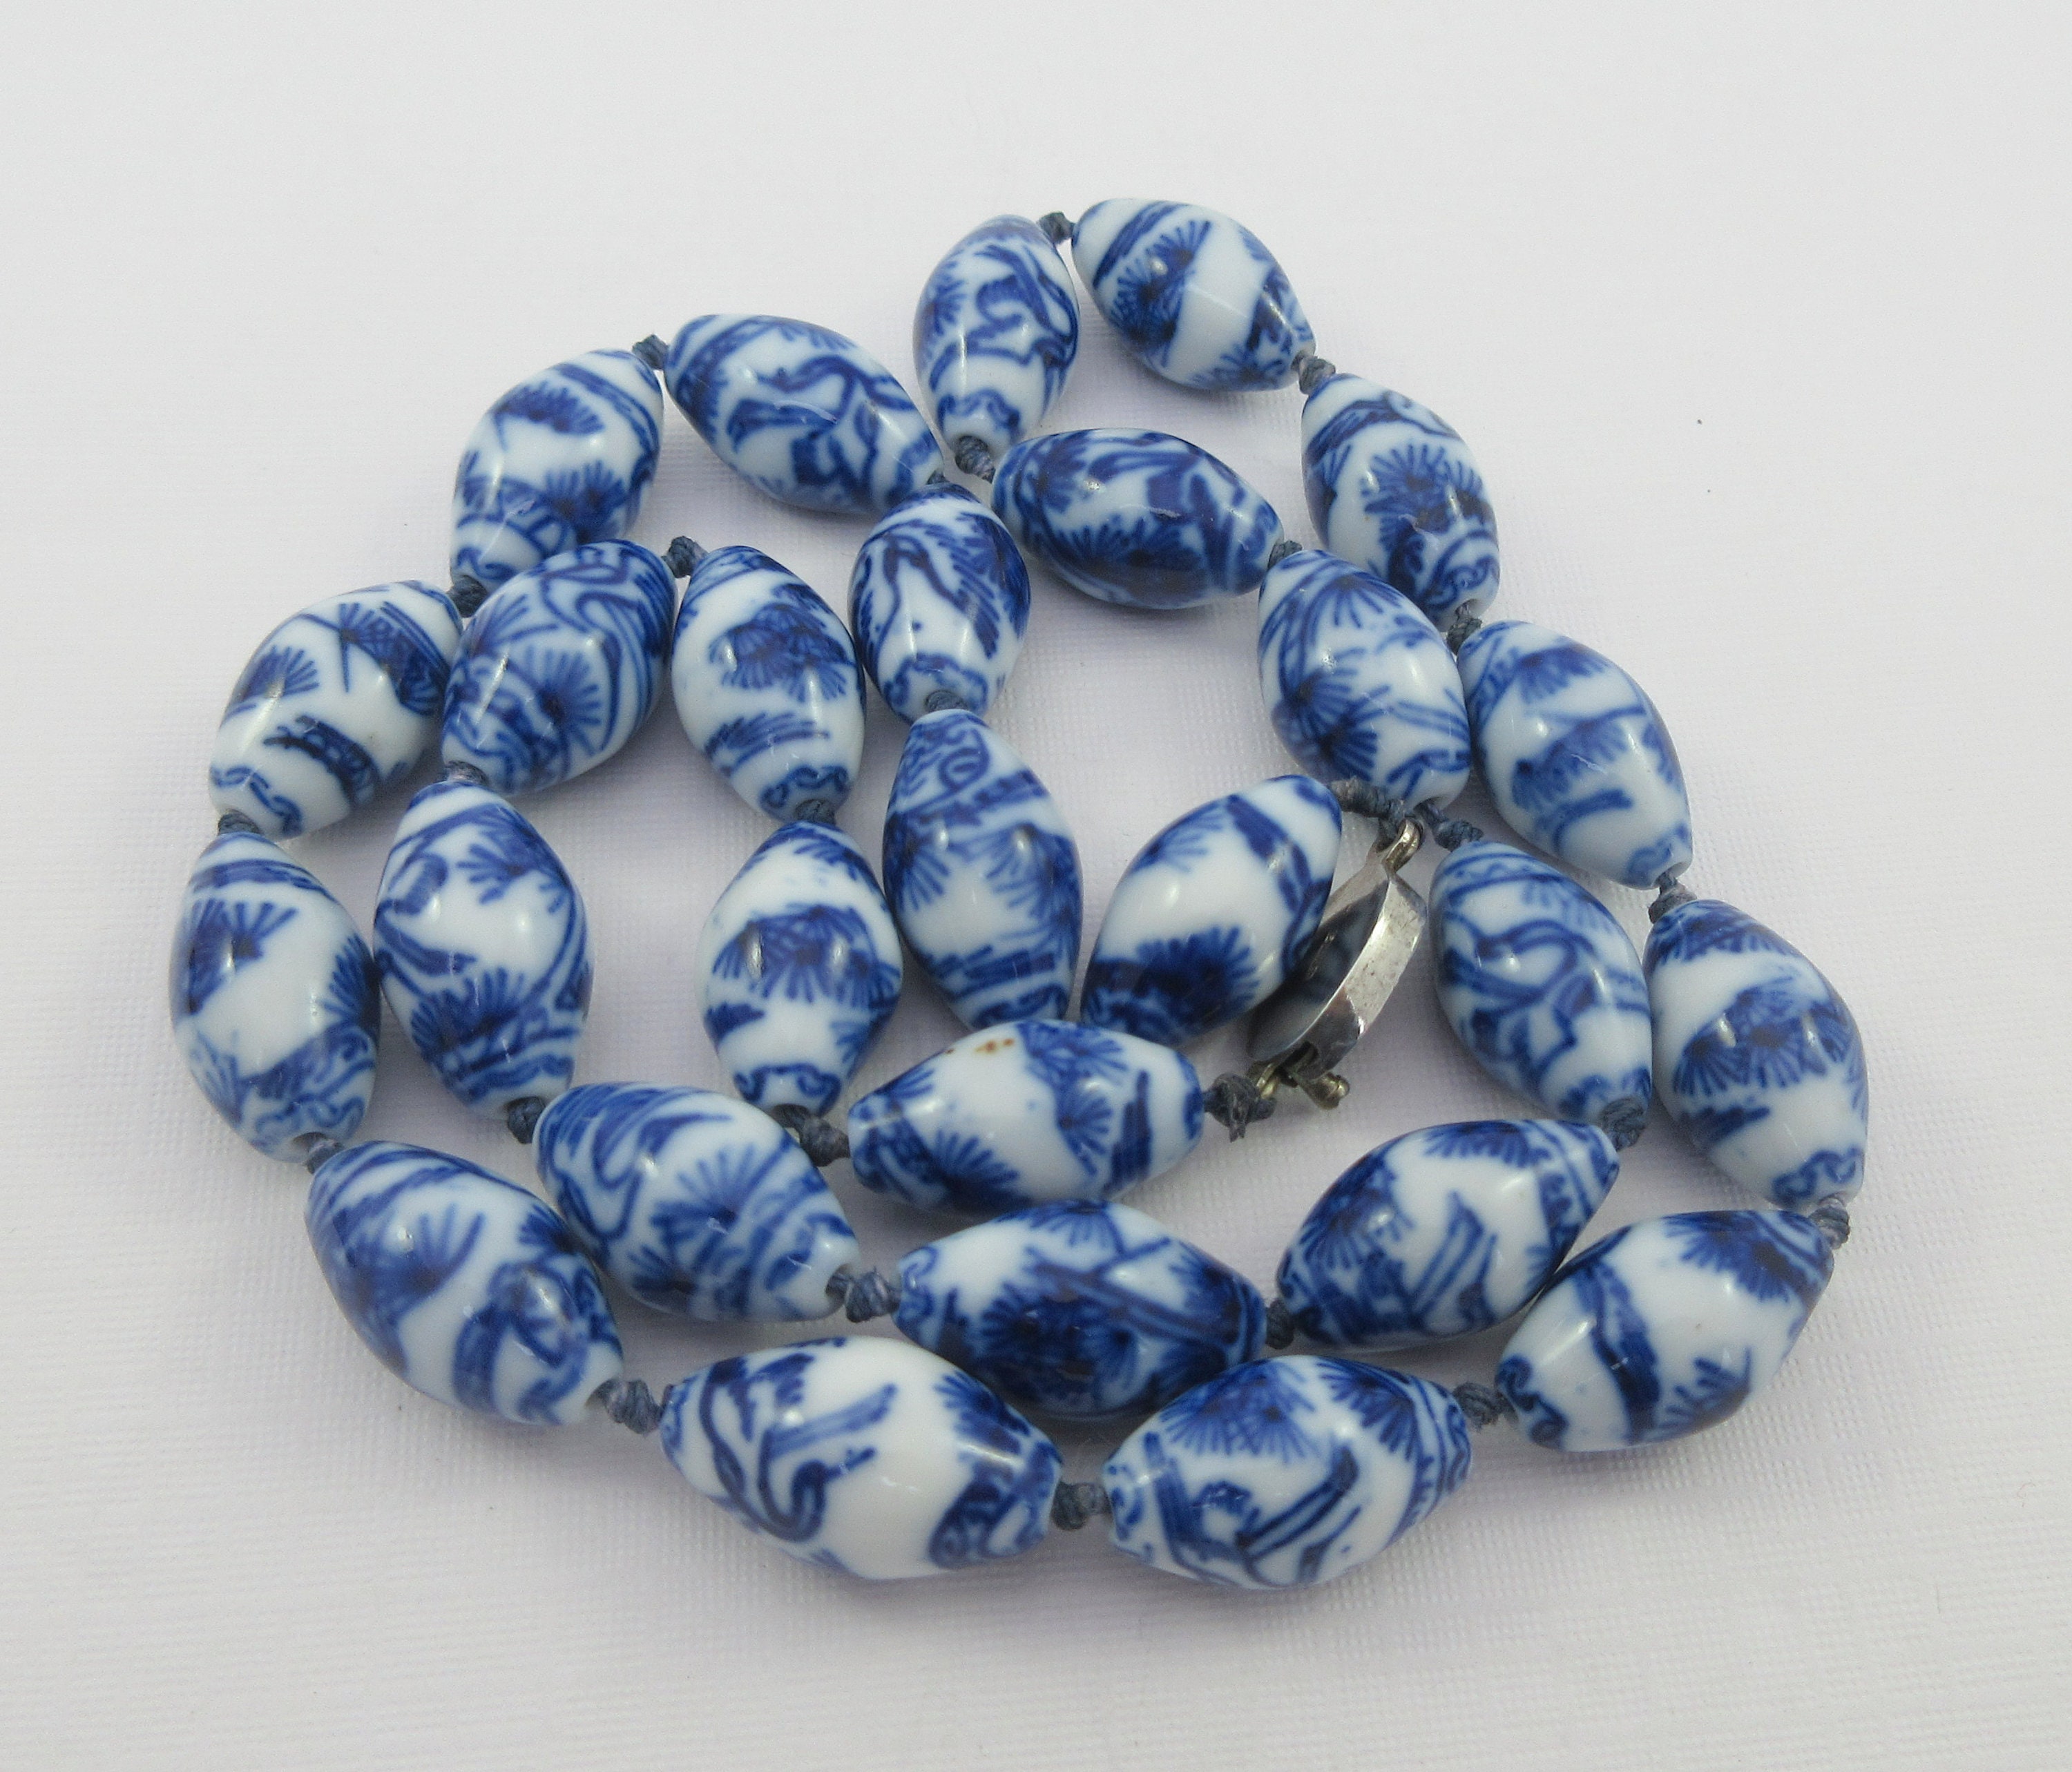 Ochoos Blue and White Porcelain Beads Bracelet OL Style Ceramics Accessories Made in China Creative Gifts Factory Price - (Metal Color: Plum Flower)